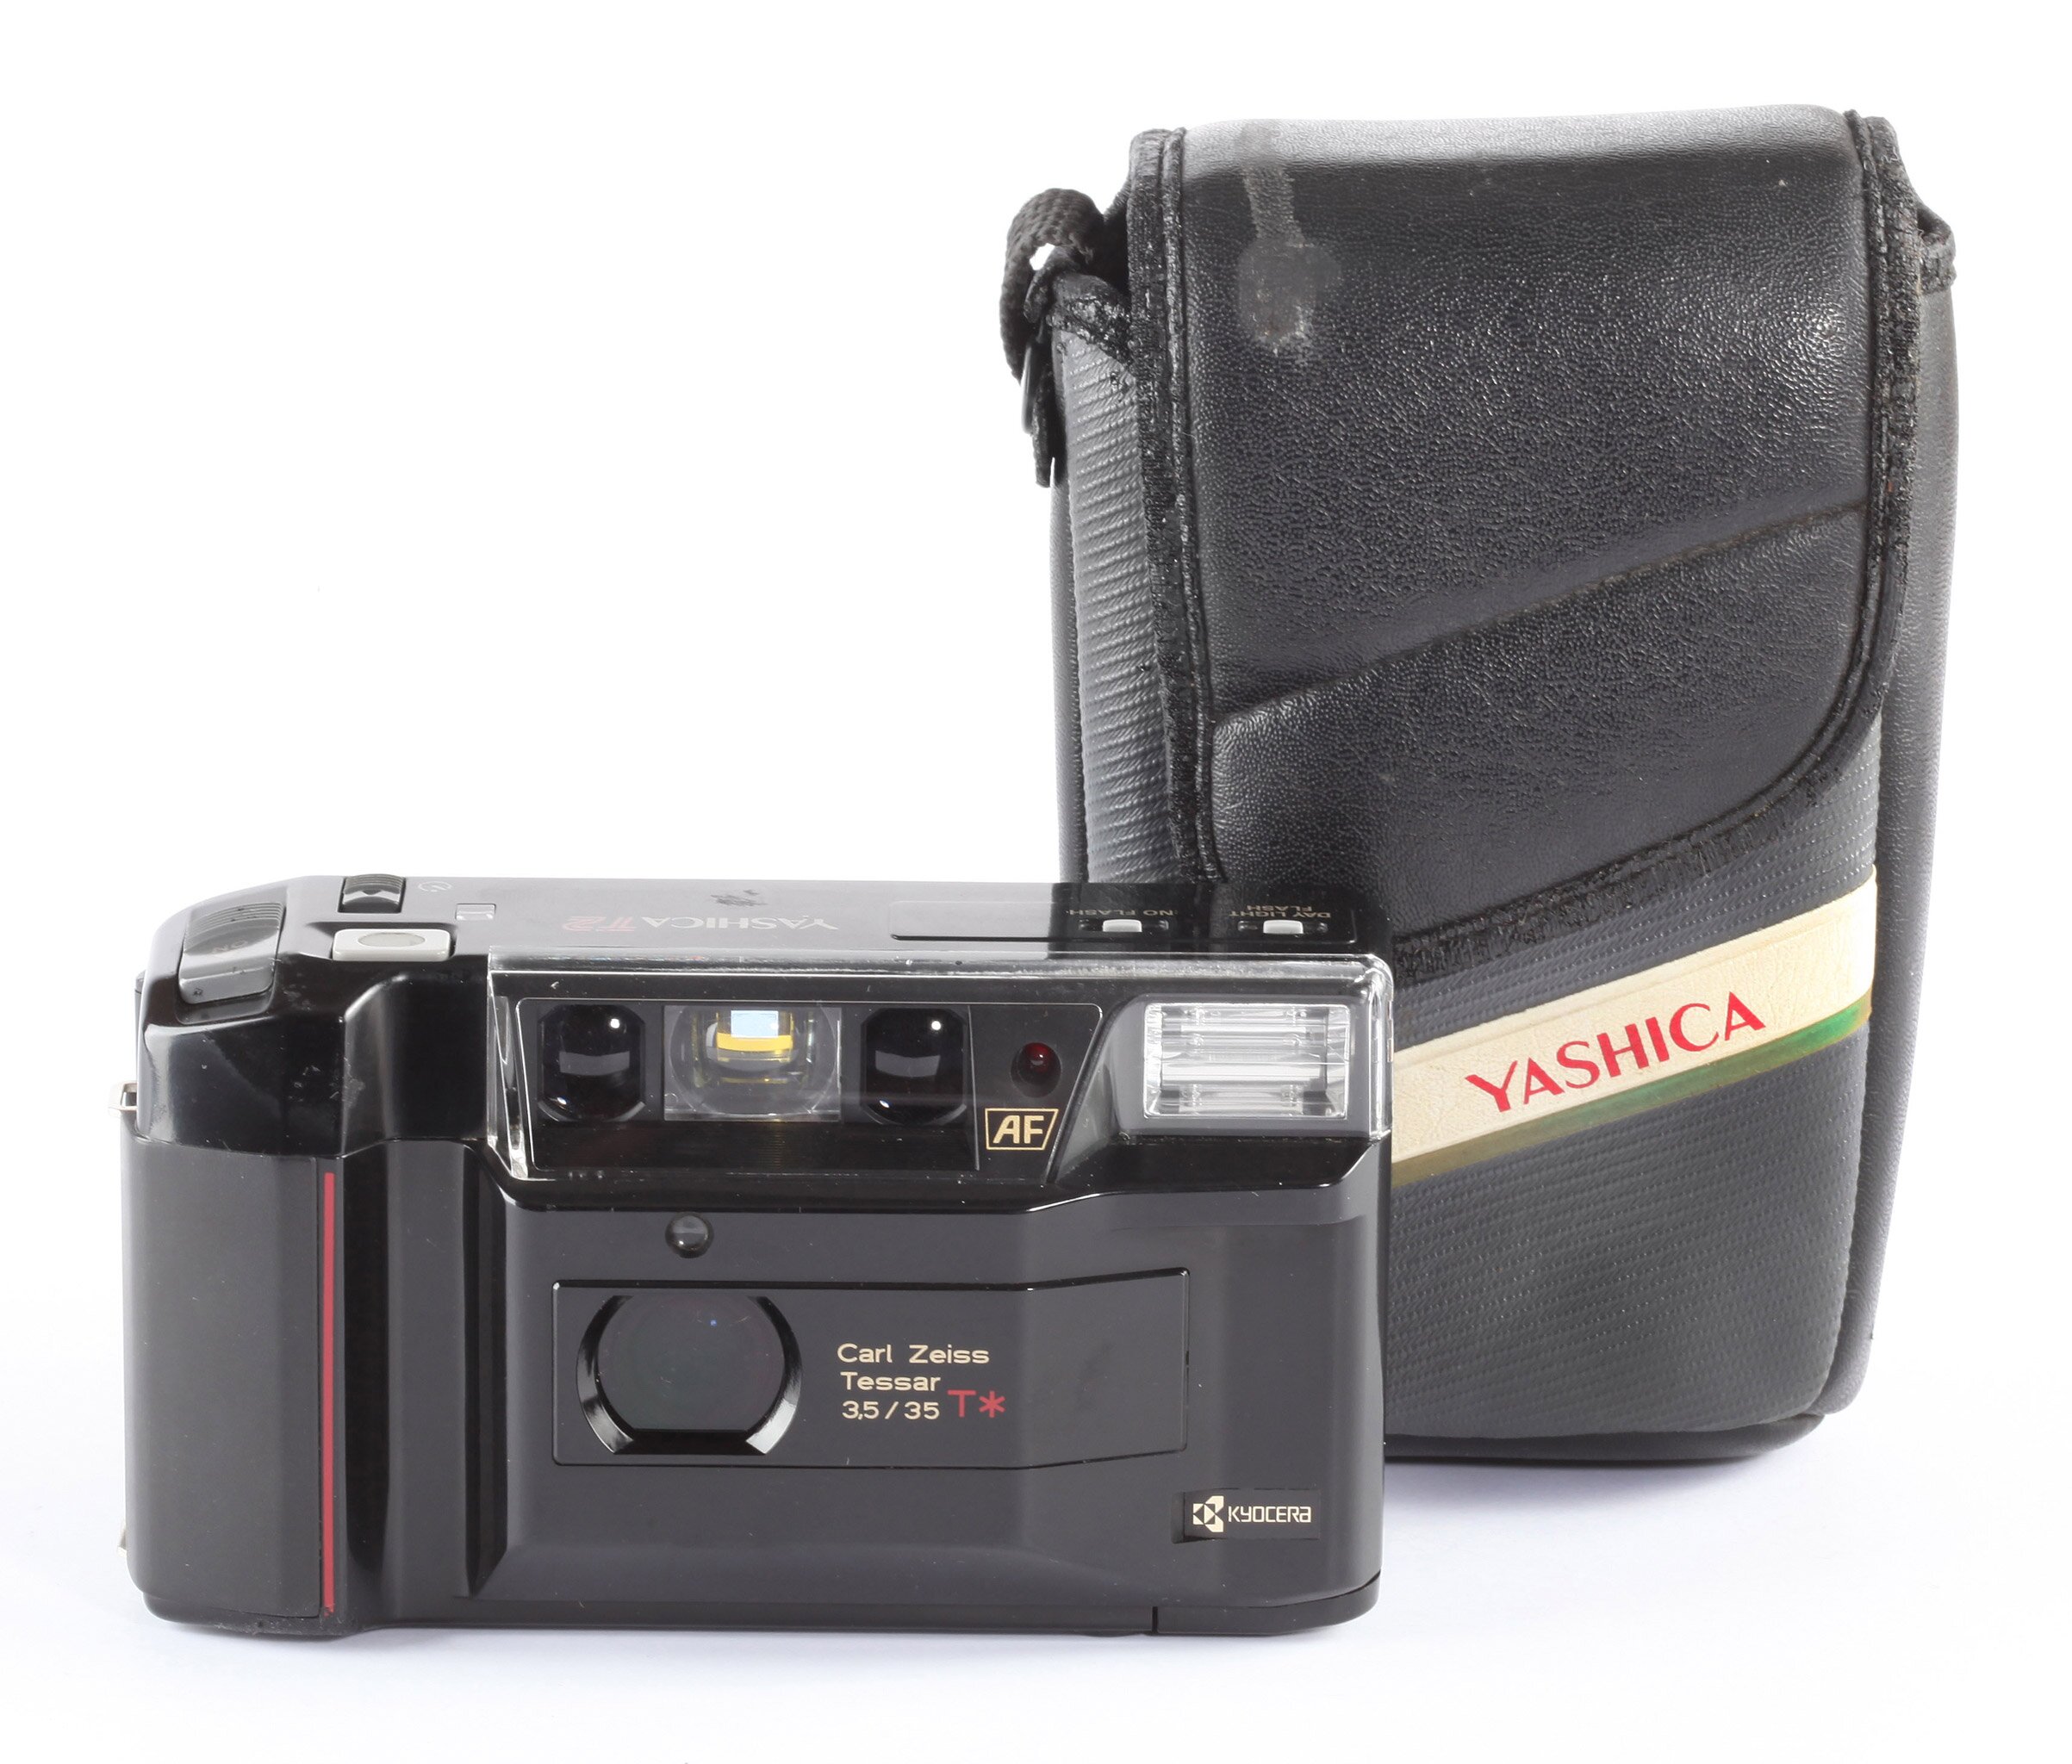 Yashica T2 Carl Zeiss Tessar 3,5/35mm T*